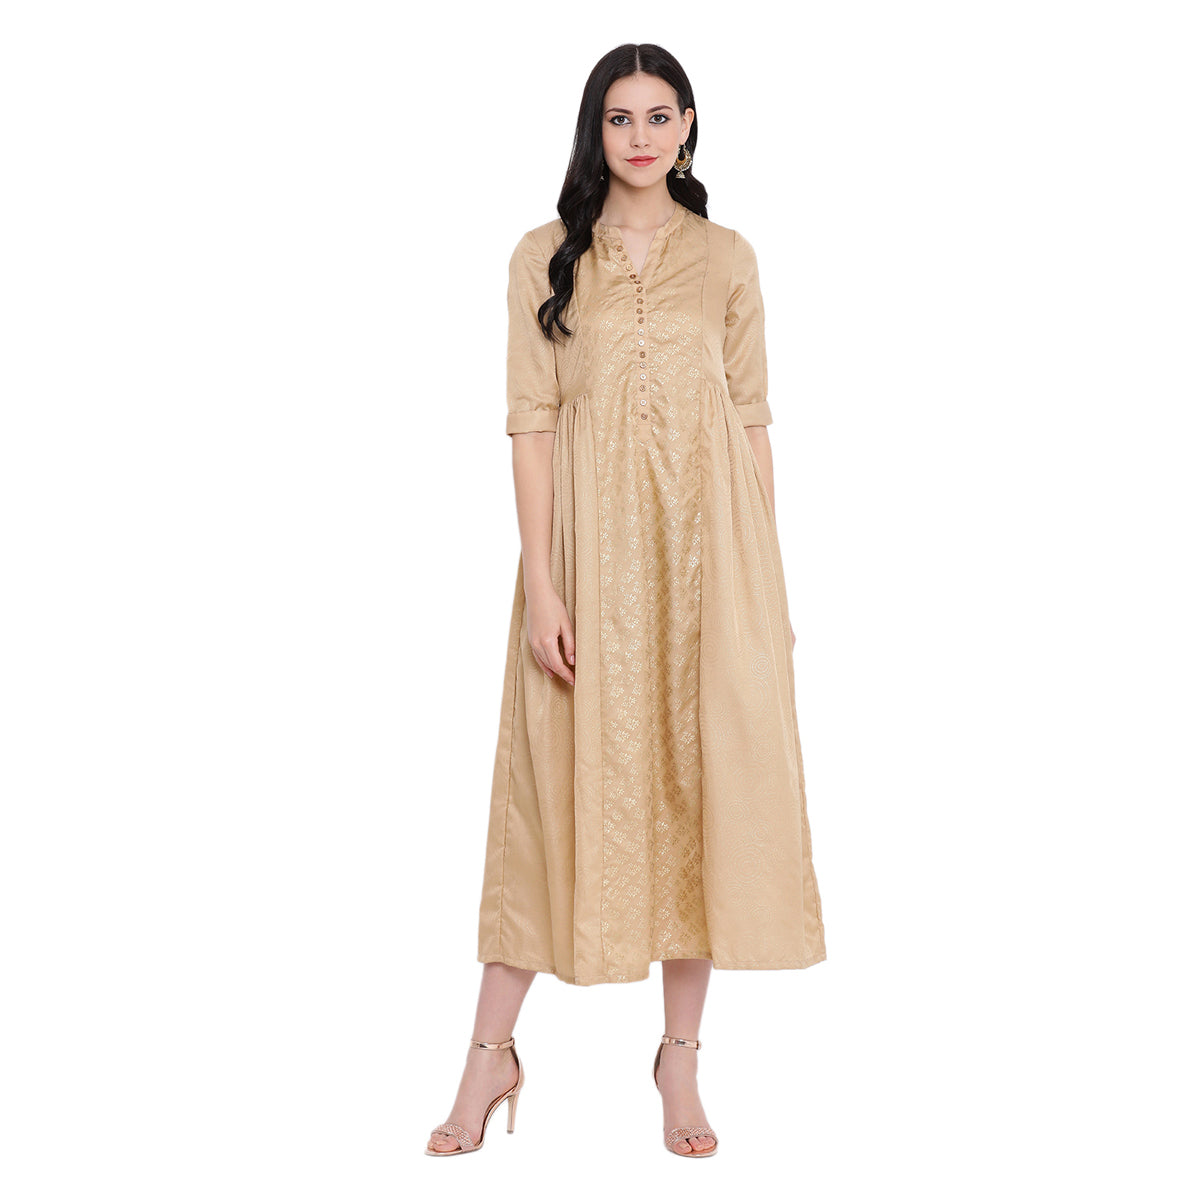 Beige tunic with gathers at waist